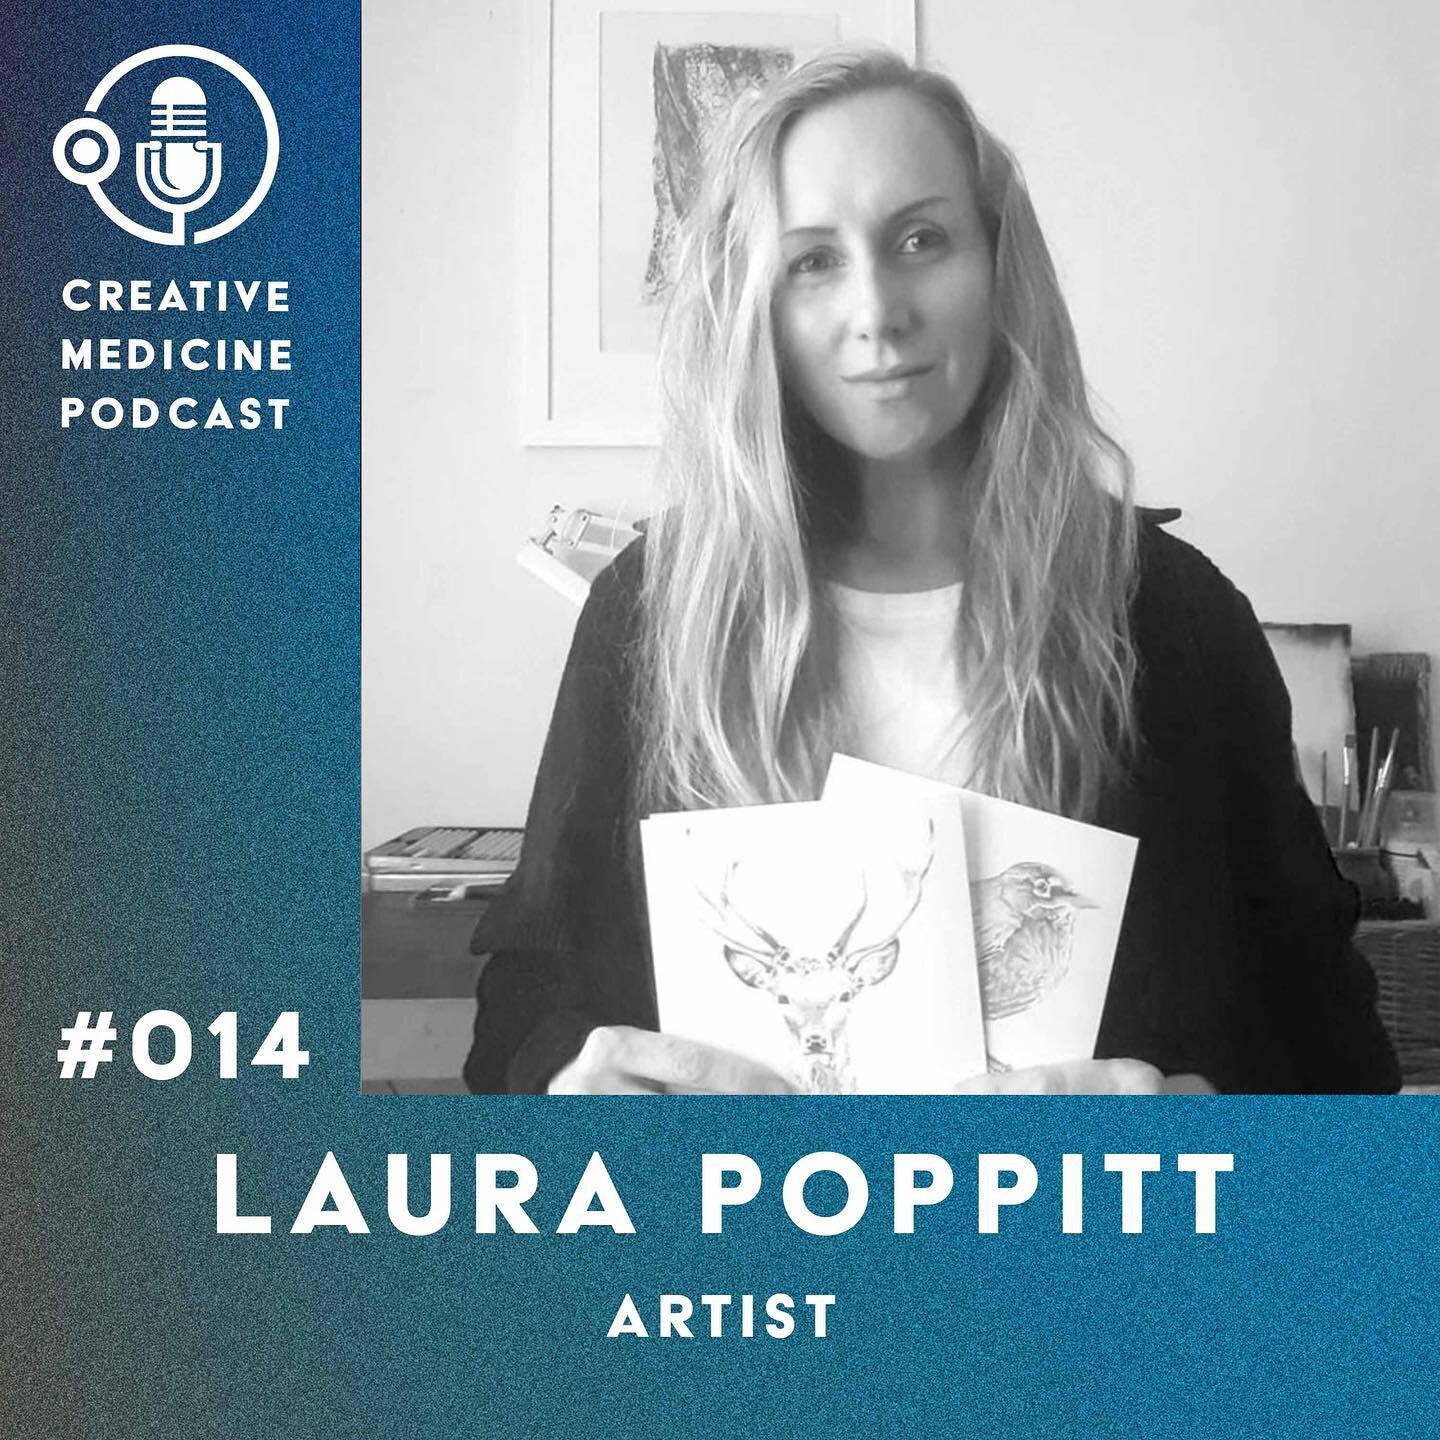 On this week&rsquo;s episode of the Creative Medicine Podcast, I speak to Artist Laura Poppitt  @poppitt.art 🎨

Full episode available at your favourite streaming platform. Link in bio 👆

We speak about Laura&rsquo;s journey with alcohol dependence